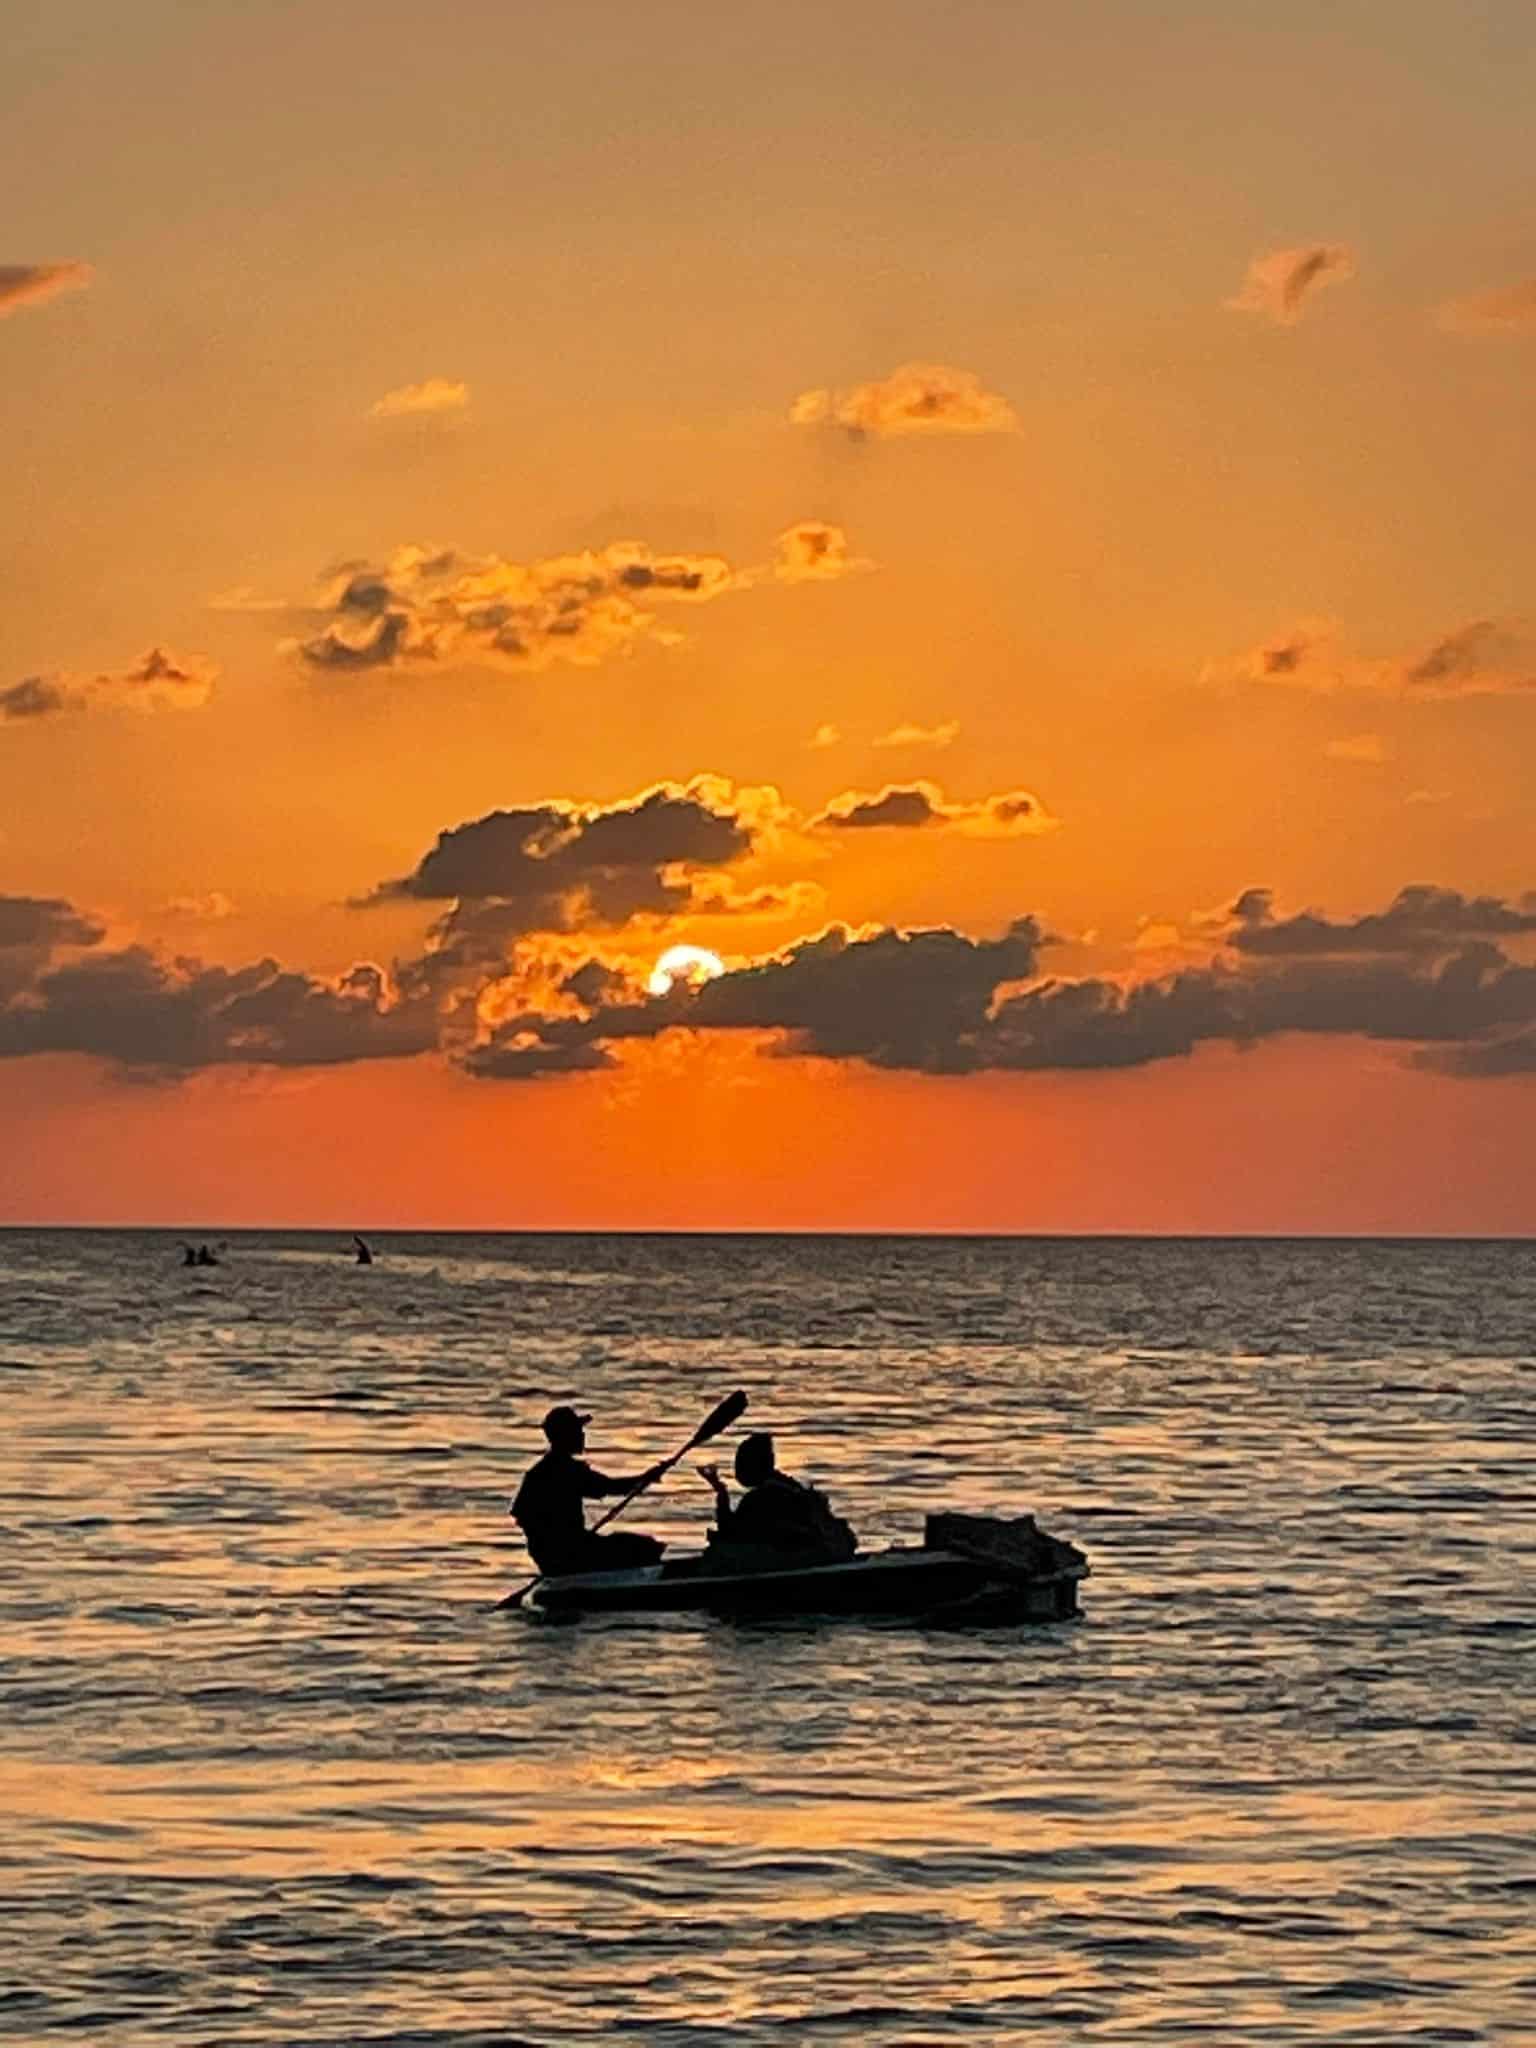 Two men on a small rowing boat just off the coast of Caye Caulker in Belize. The sun is setting in the background creating an orange sky as the sun sets behind the clouds